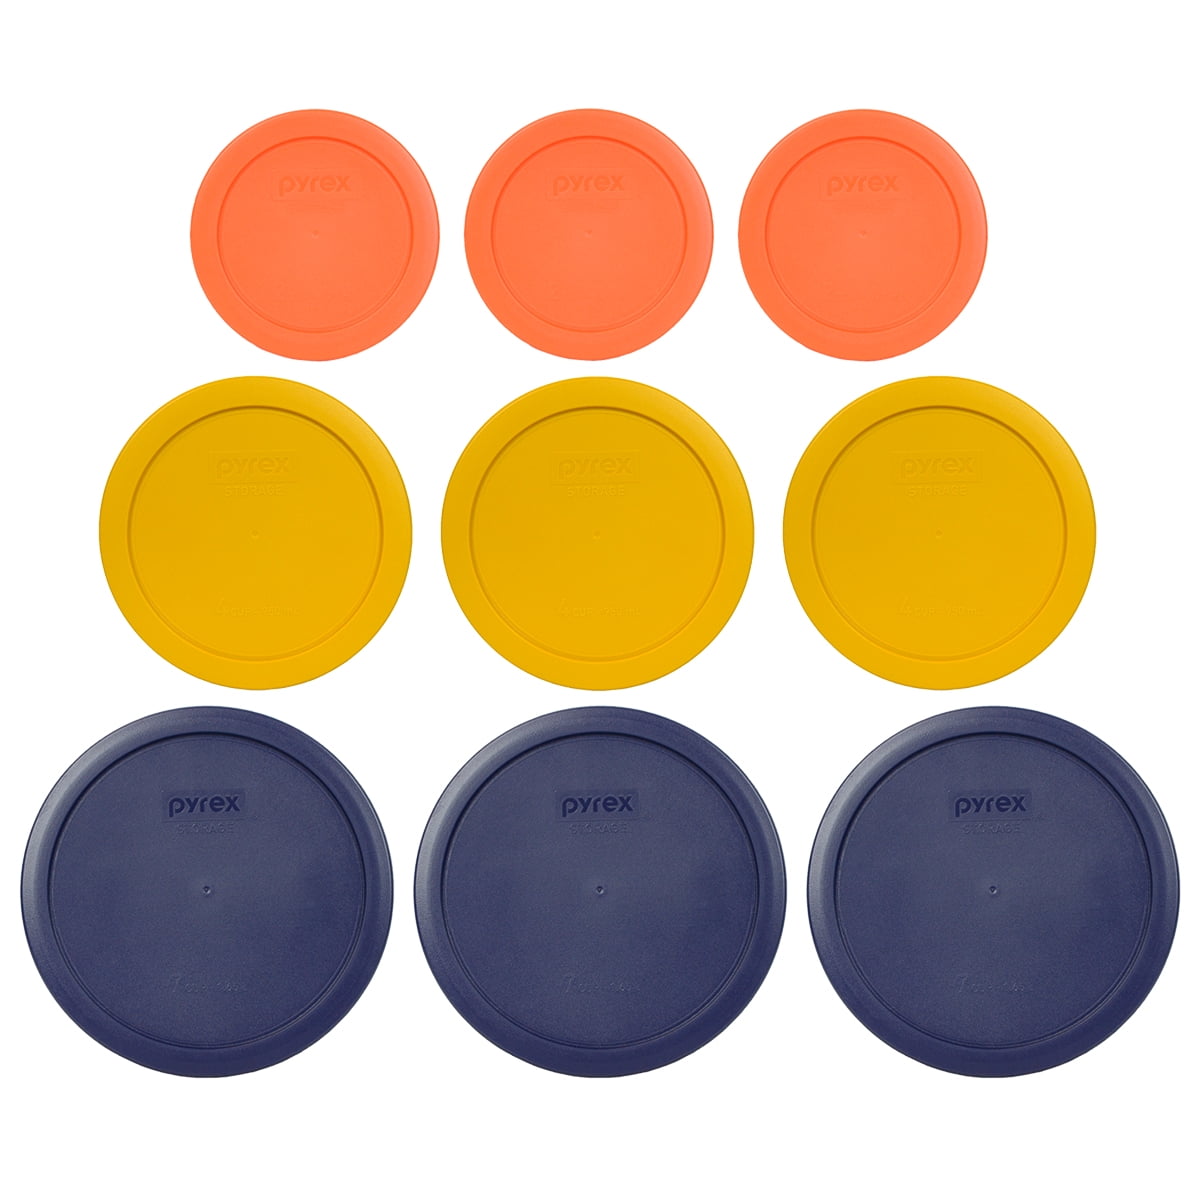 Pyrex 7200-PC 2 Cup Round 5" Storage Lid Cover 3 Pack Red Blue Orange New 